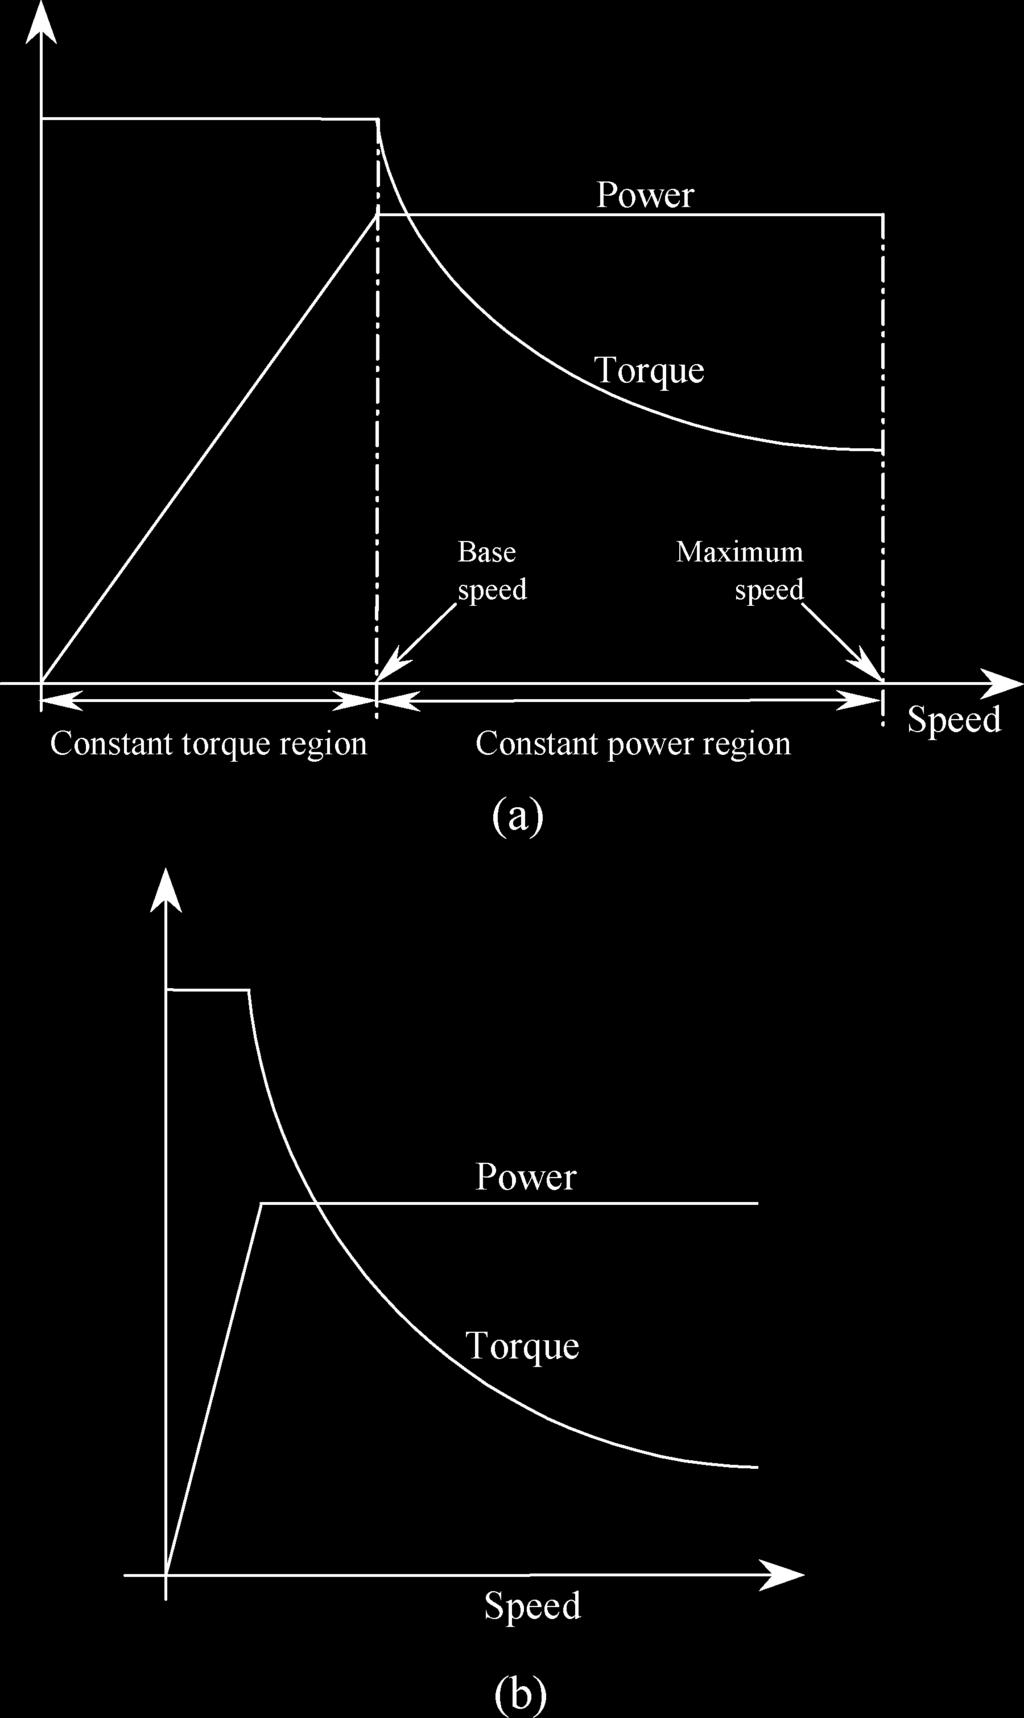 The ratio between the maximum power of the electric motor (P EM ) and the ICE (P ICE ) is characterized by the hybridization factor (HF) that is defined as HF = P EM P EM + P ICE = P EM P HEV where P